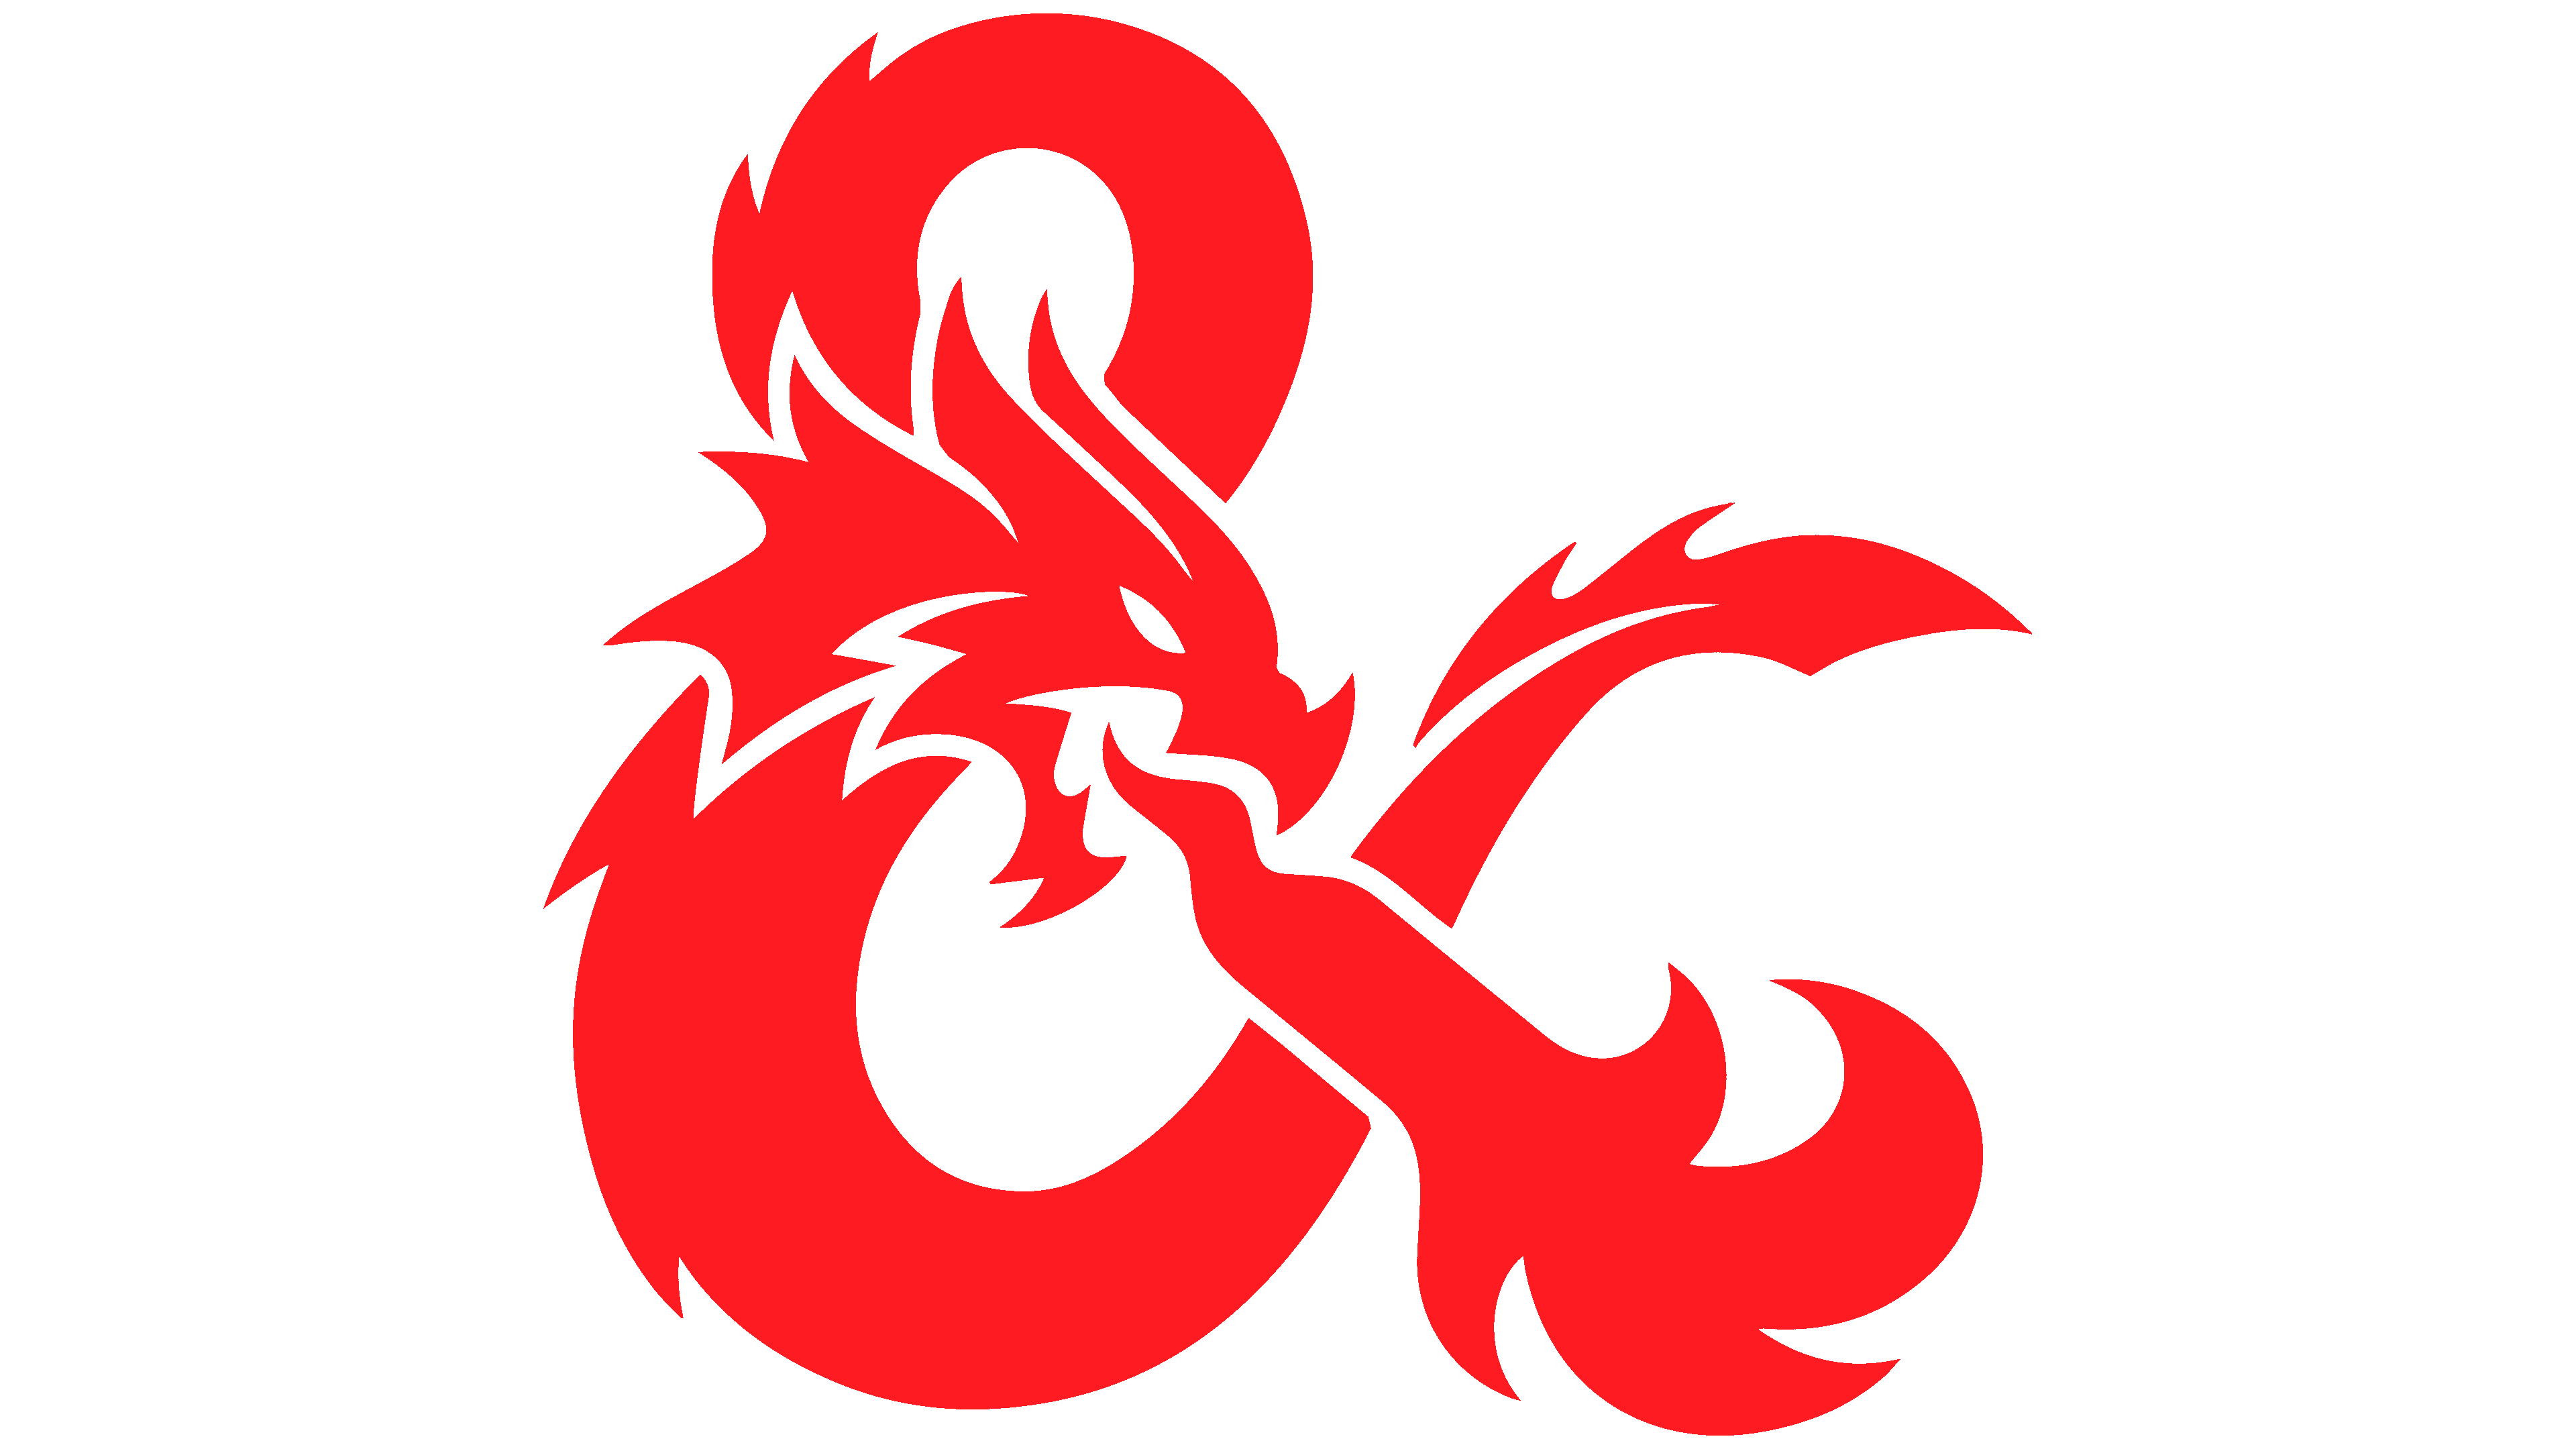 DnD (Dungeons & Dragons) Logo, symbol, meaning, history, PNG, brand